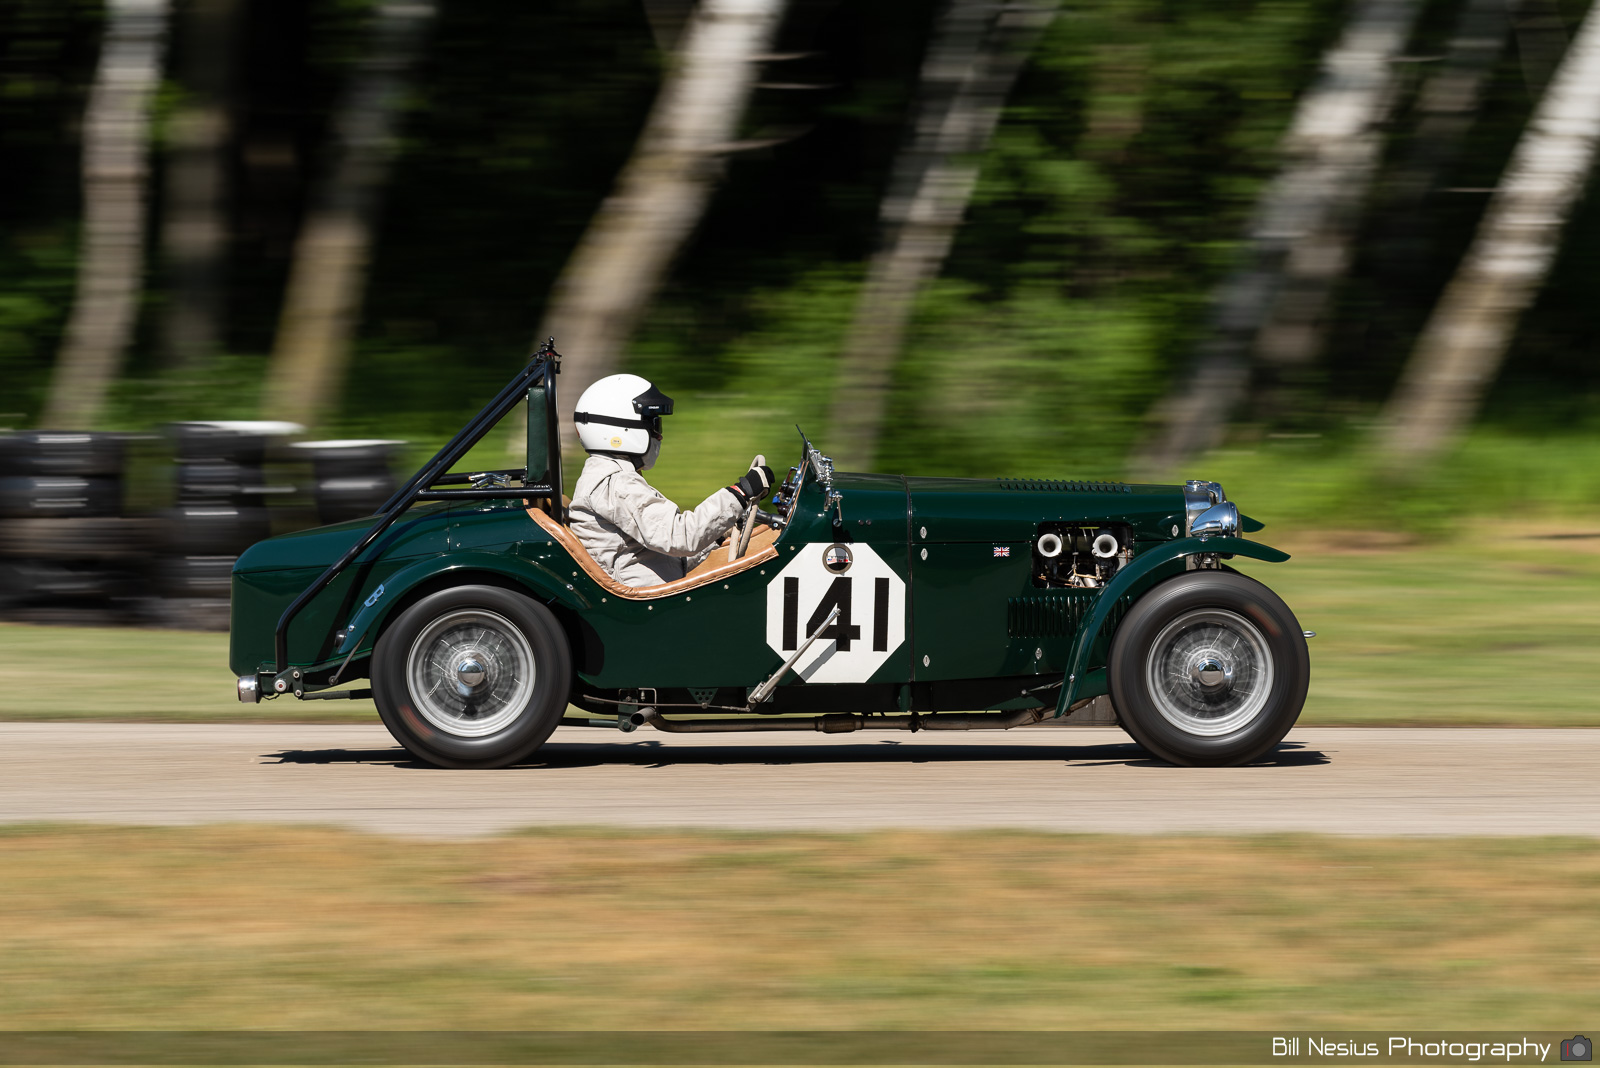 1952 MG TF Number 141 / DSC_9754 / 3